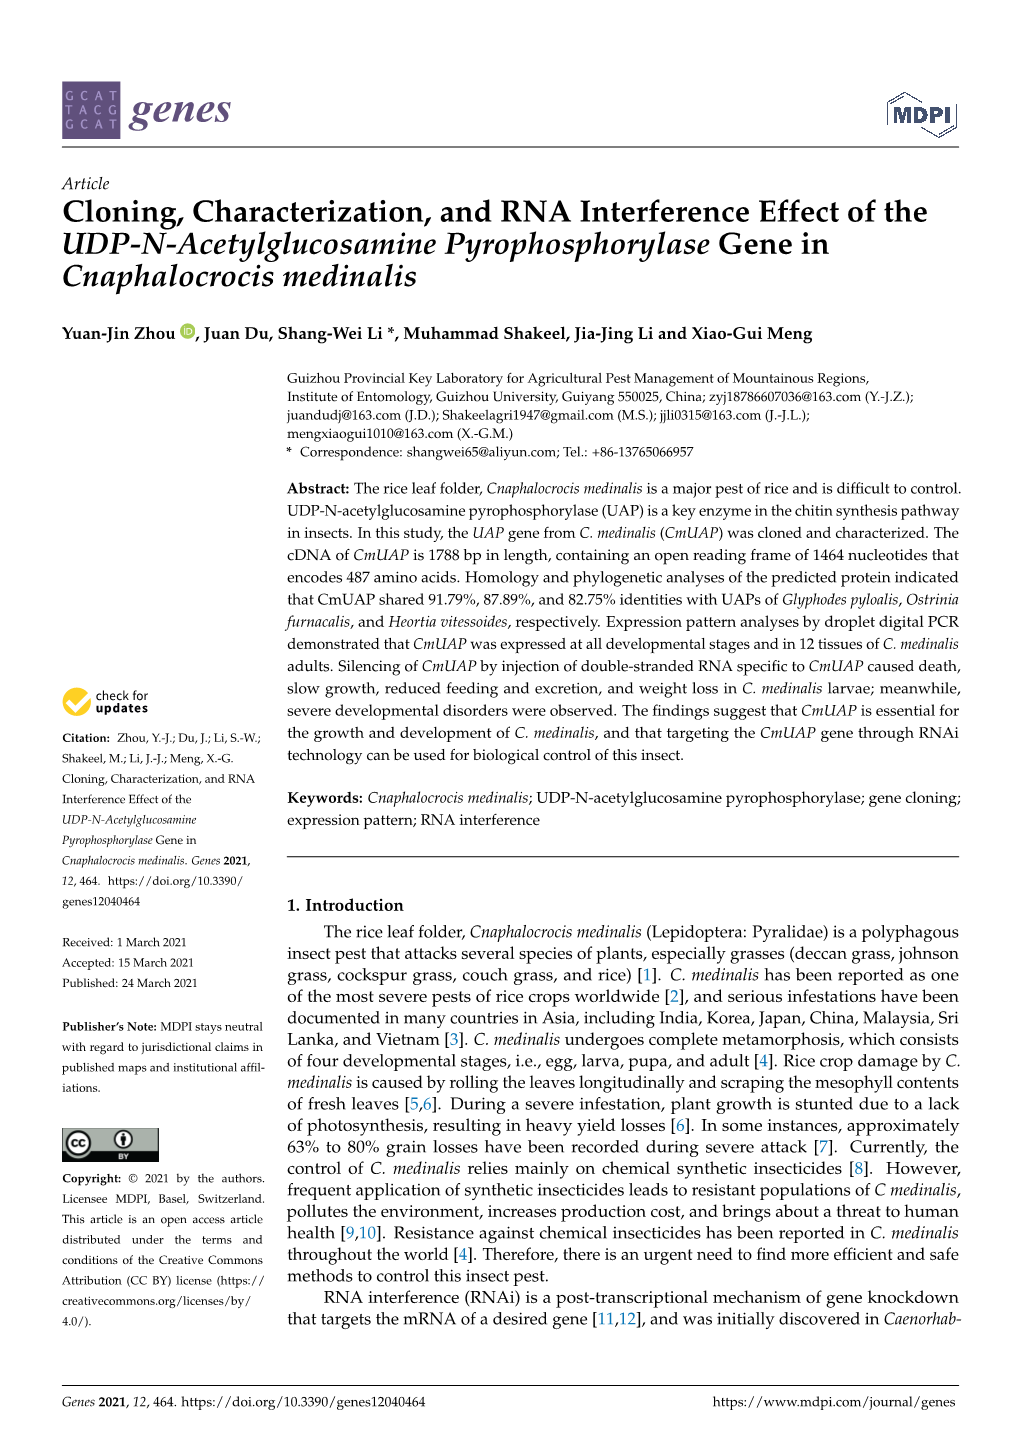 Cloning, Characterization, and RNA Interference Effect of the UDP-N-Acetylglucosamine Pyrophosphorylase Gene in Cnaphalocrocis Medinalis